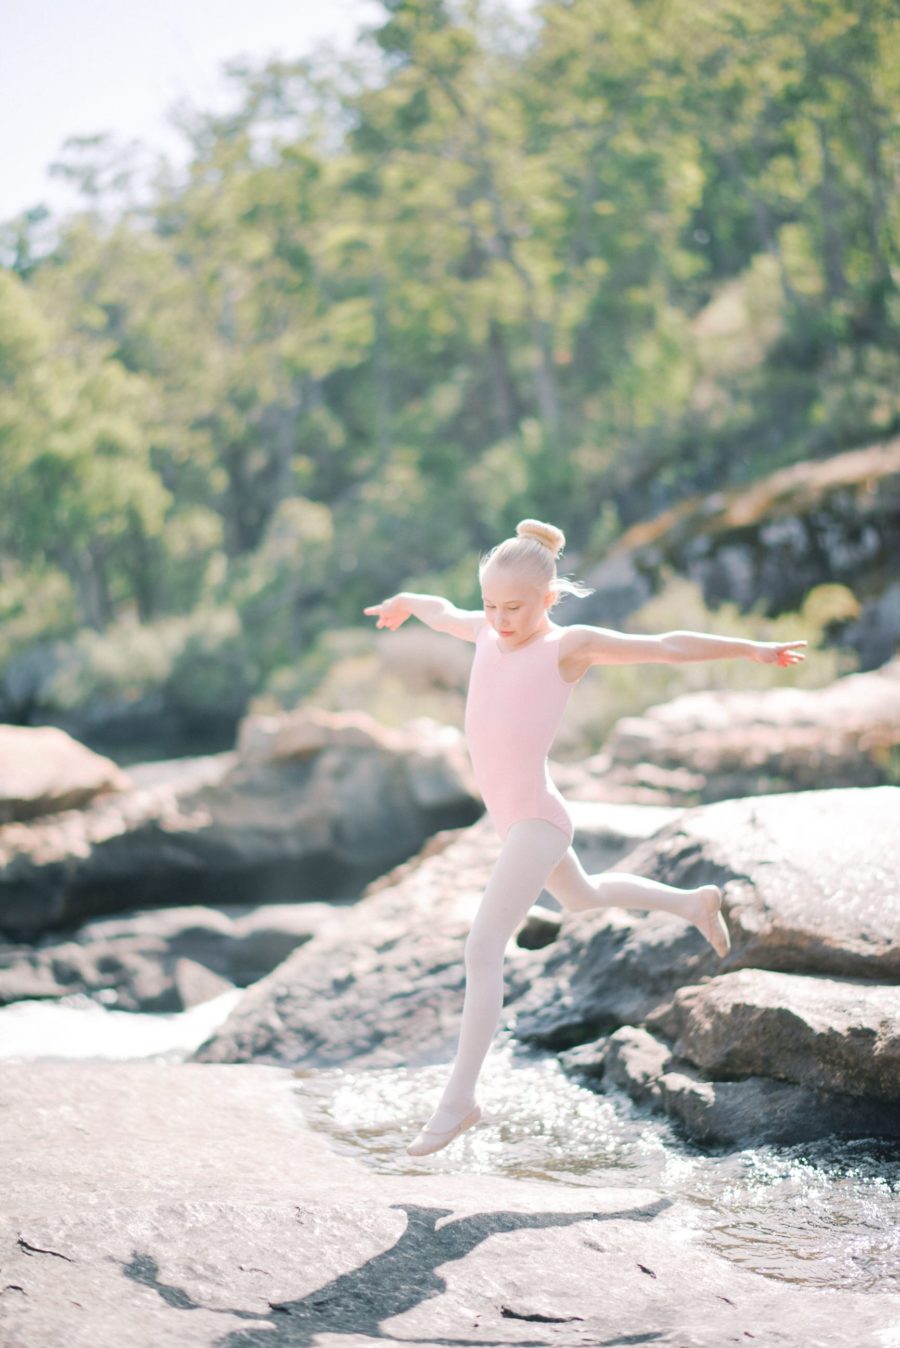 Discovering the dreamy world of a little ballerina. Photo by Ben Yew